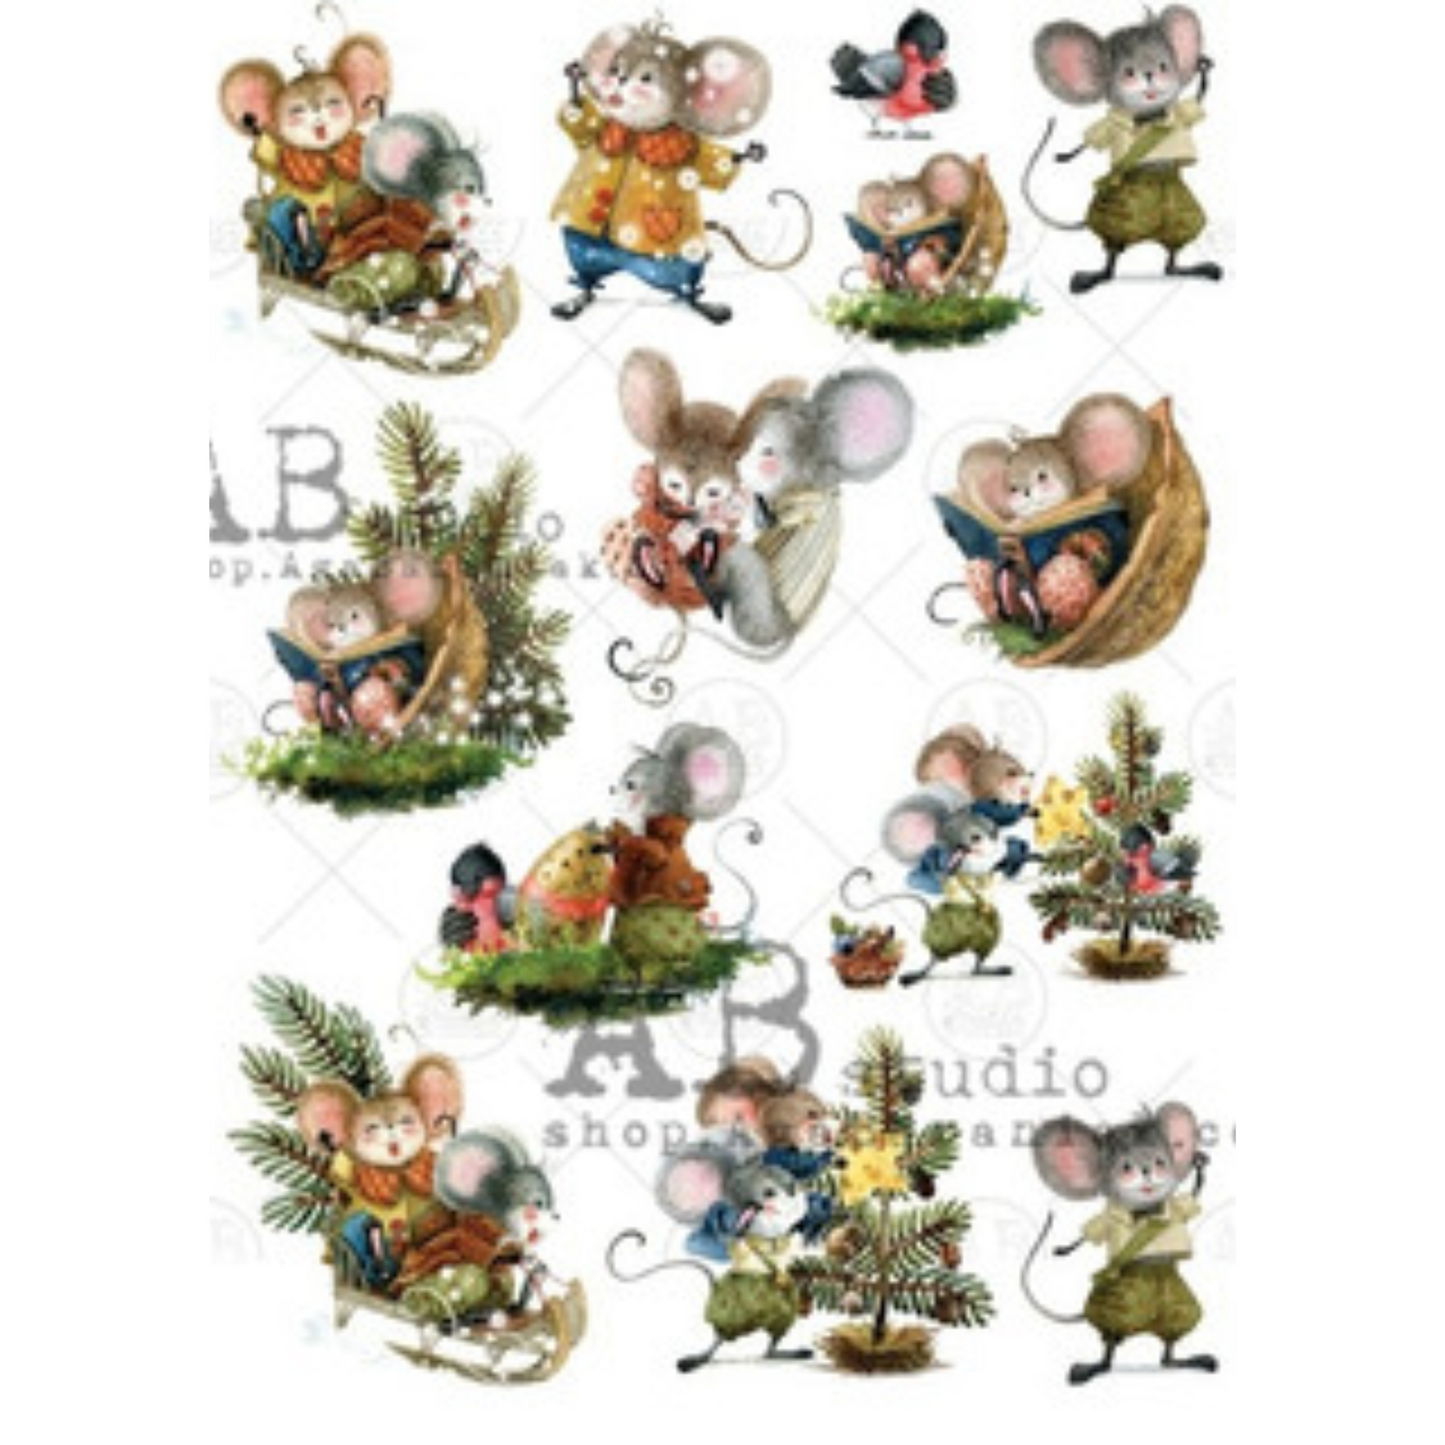 "Christmas Mice Scenes" decoupage rice paper by AB Studio. Available at Milton's Daughter.